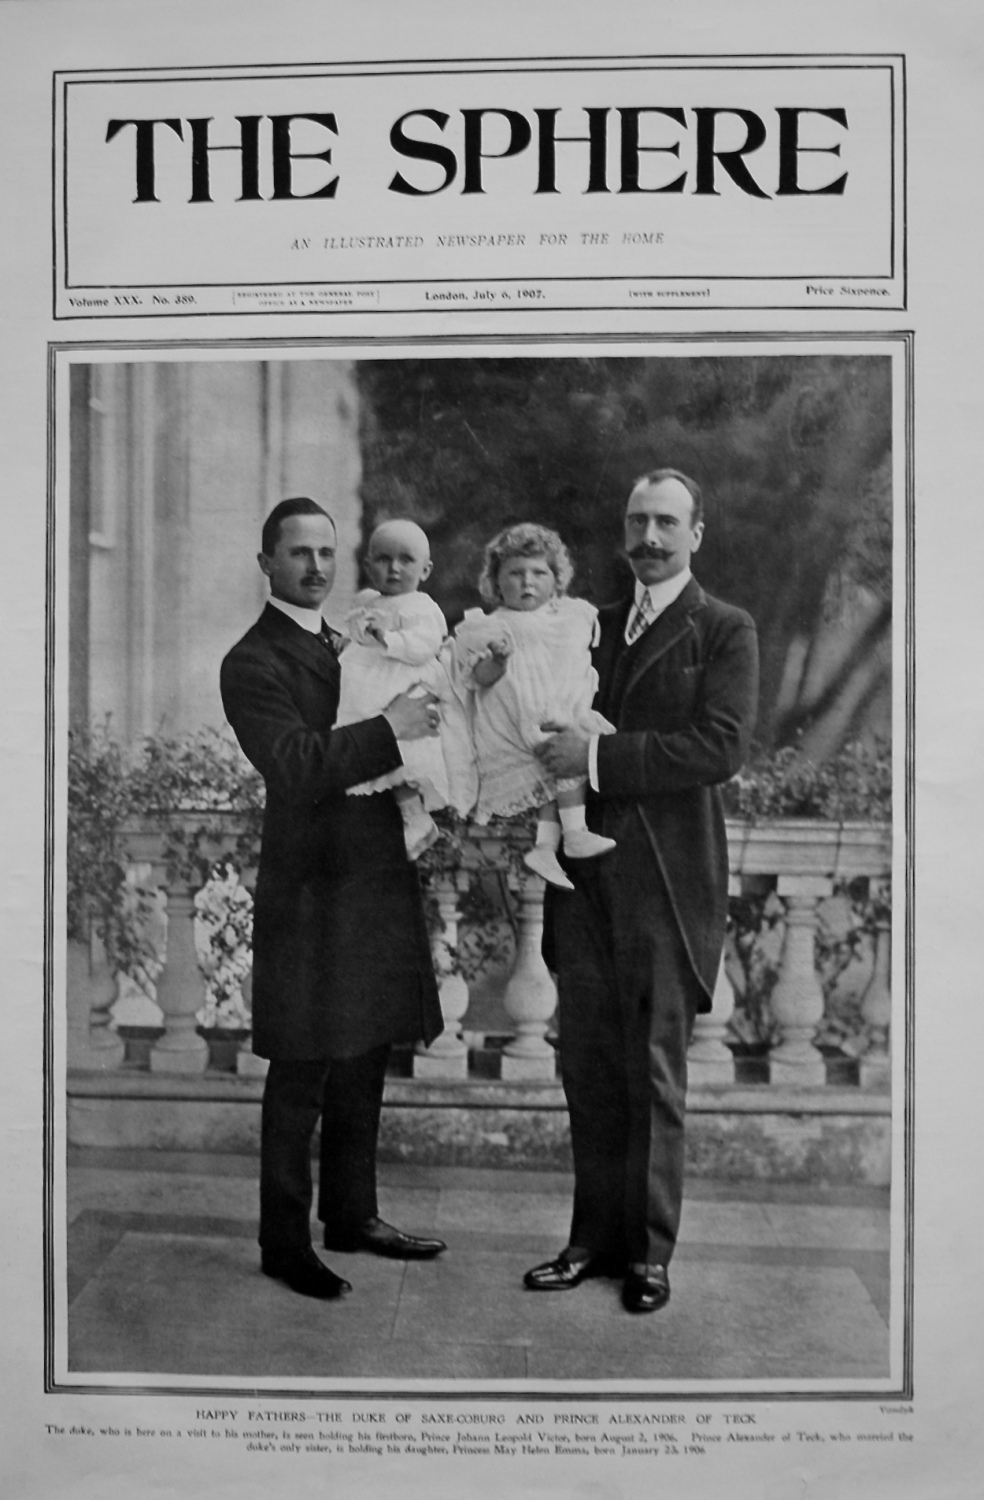 Happy Fathers - The Duke of Saxe-Coburg and Prince Alexander of Teck. 1901